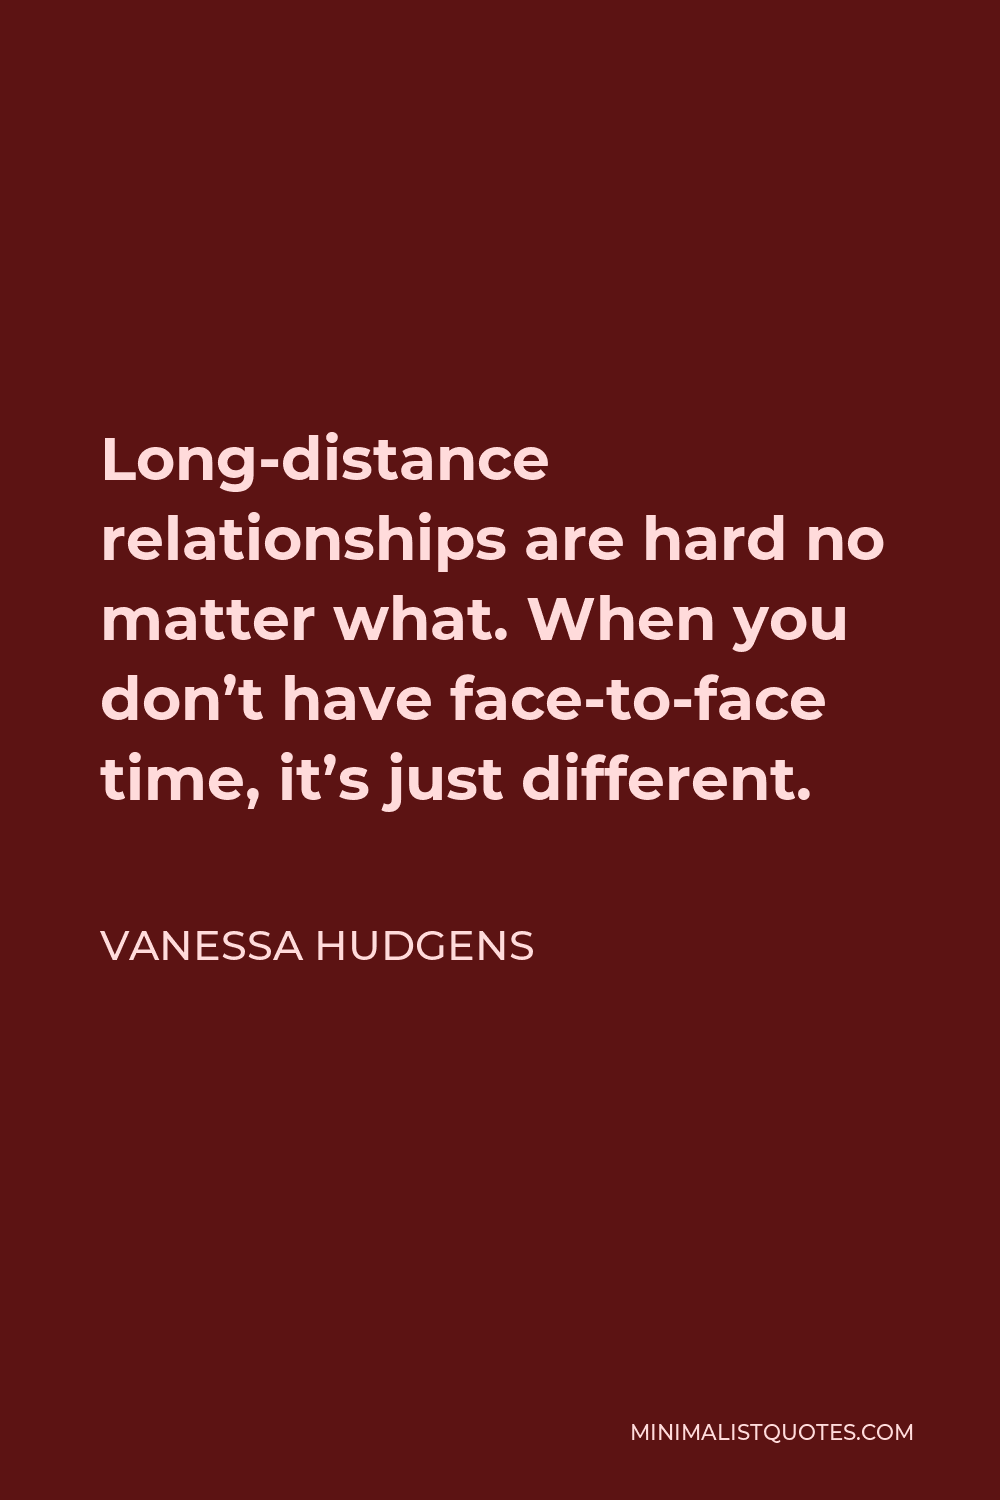 Vanessa Hudgens Quote - Long-distance relationships are hard no matter what. When you don’t have face-to-face time, it’s just different.